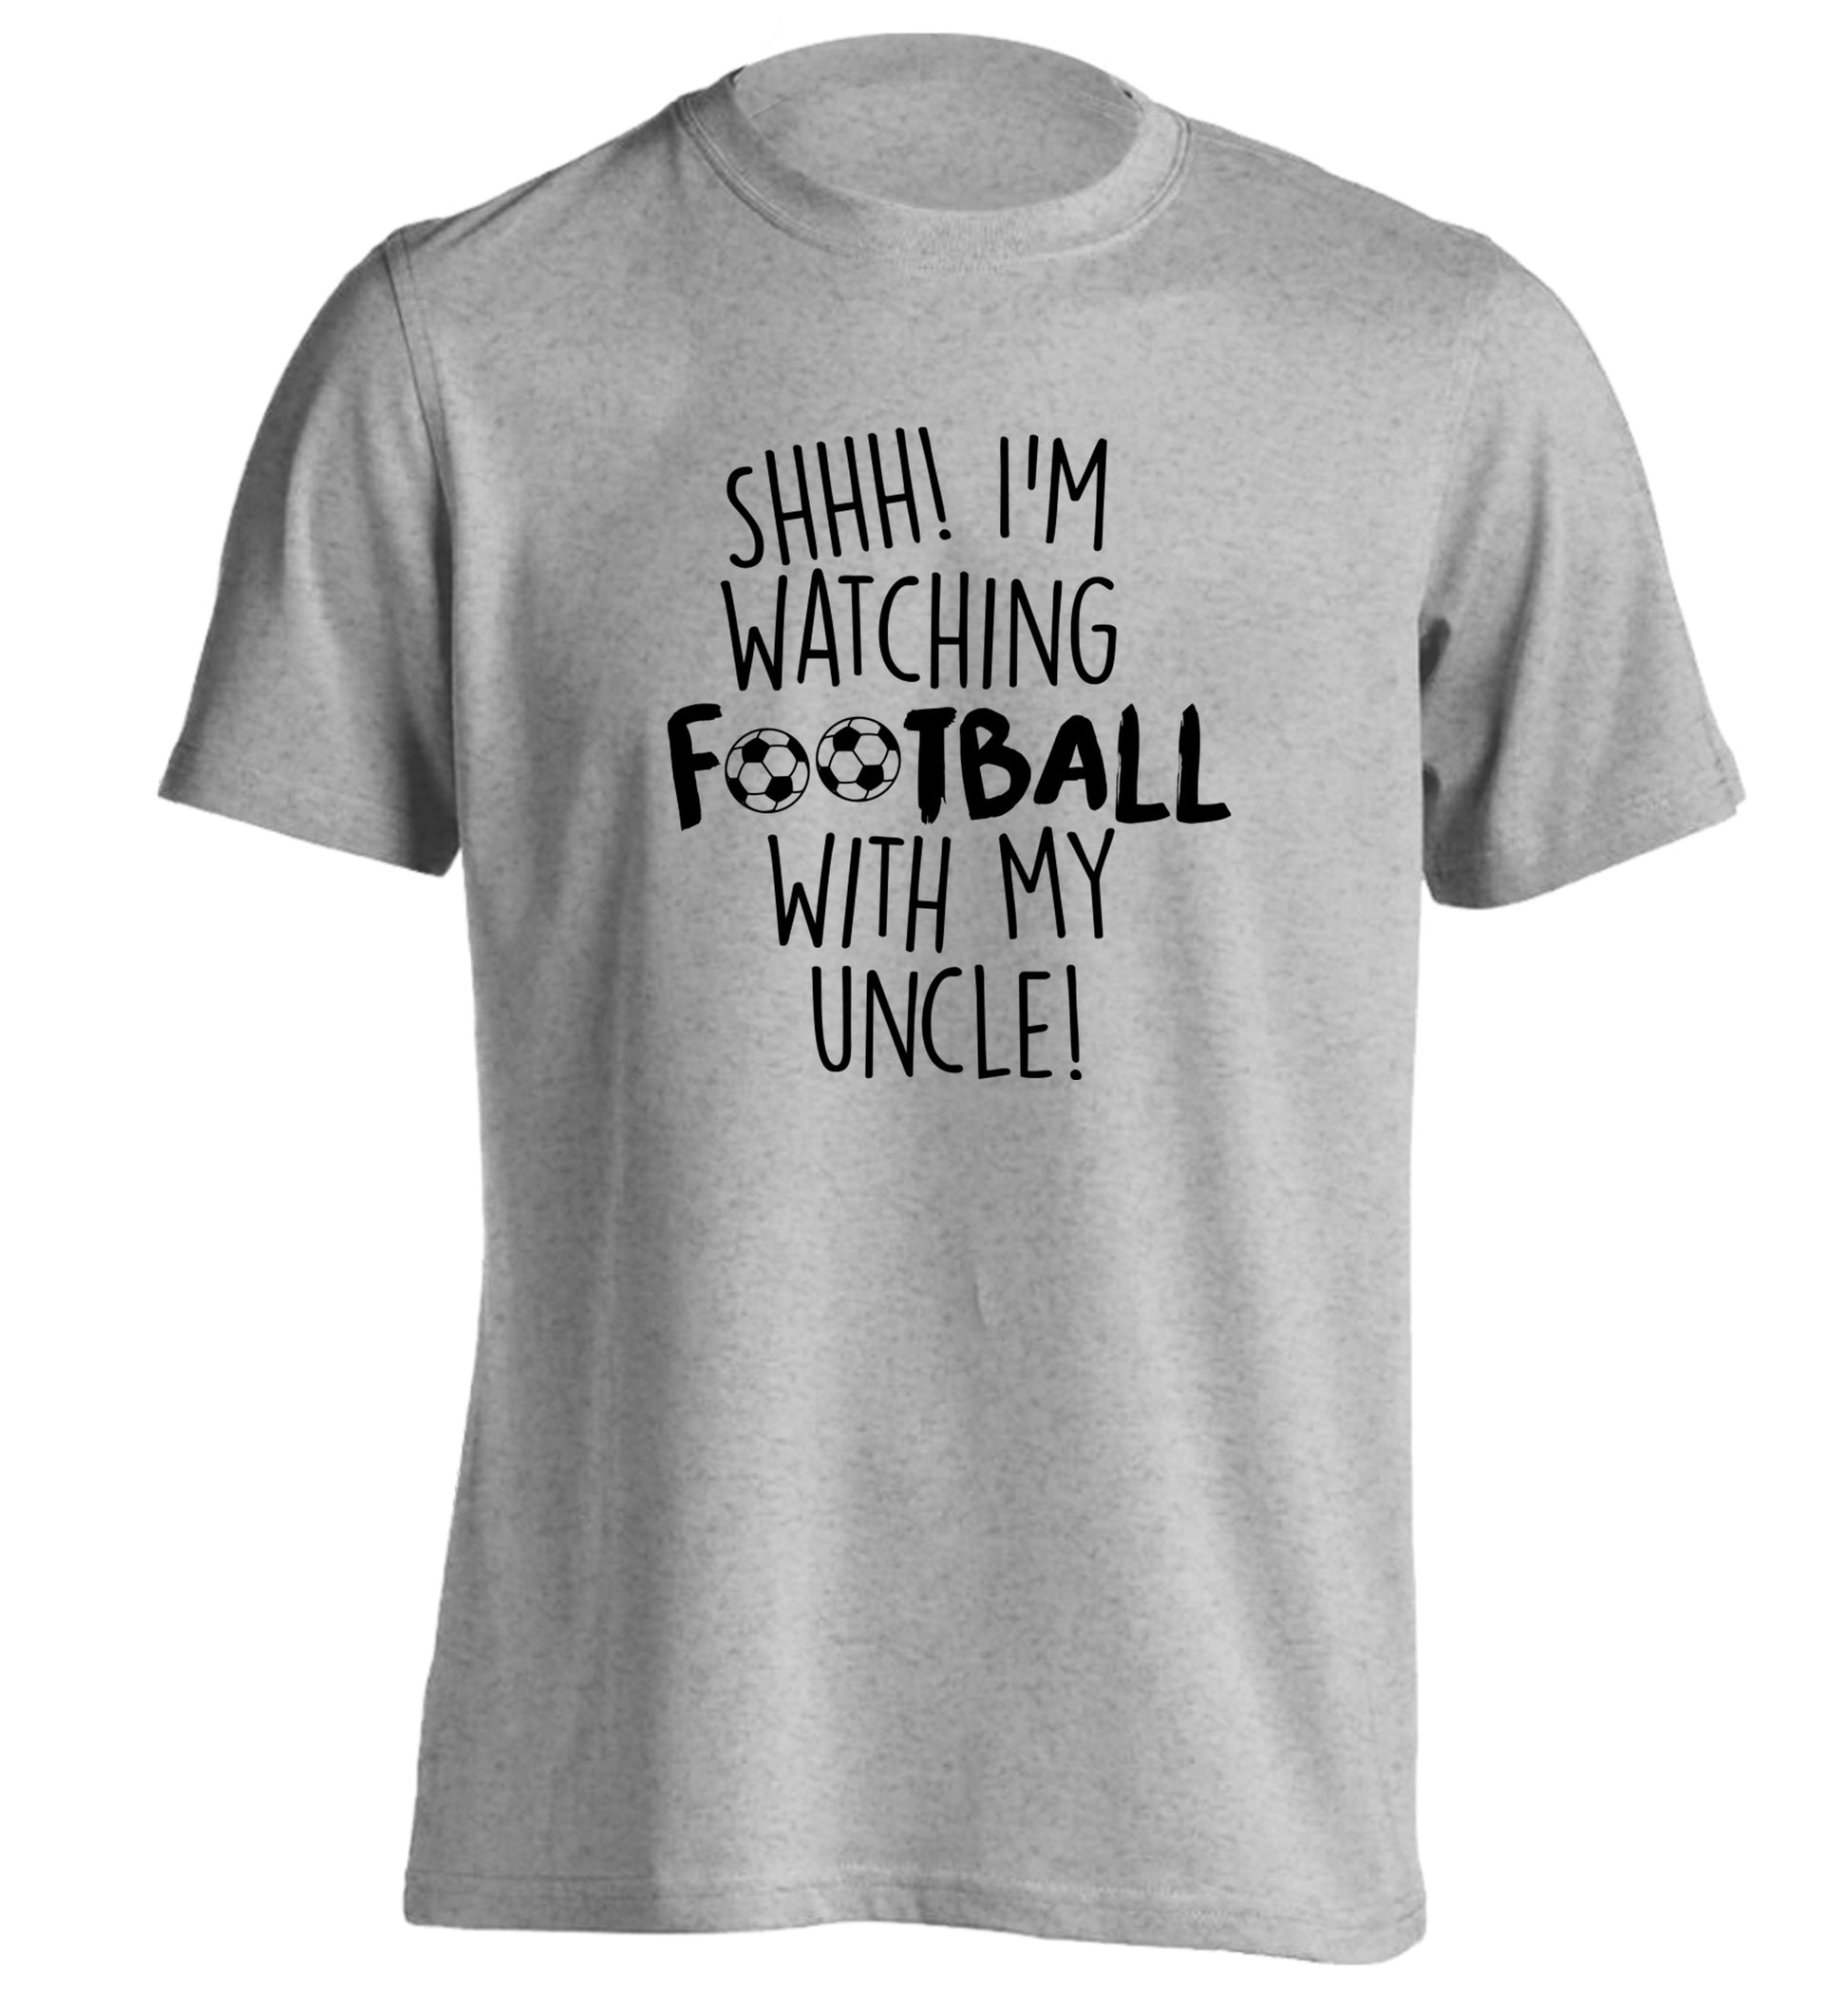 Shhh I'm watching football with my uncle adults unisexgrey Tshirt 2XL